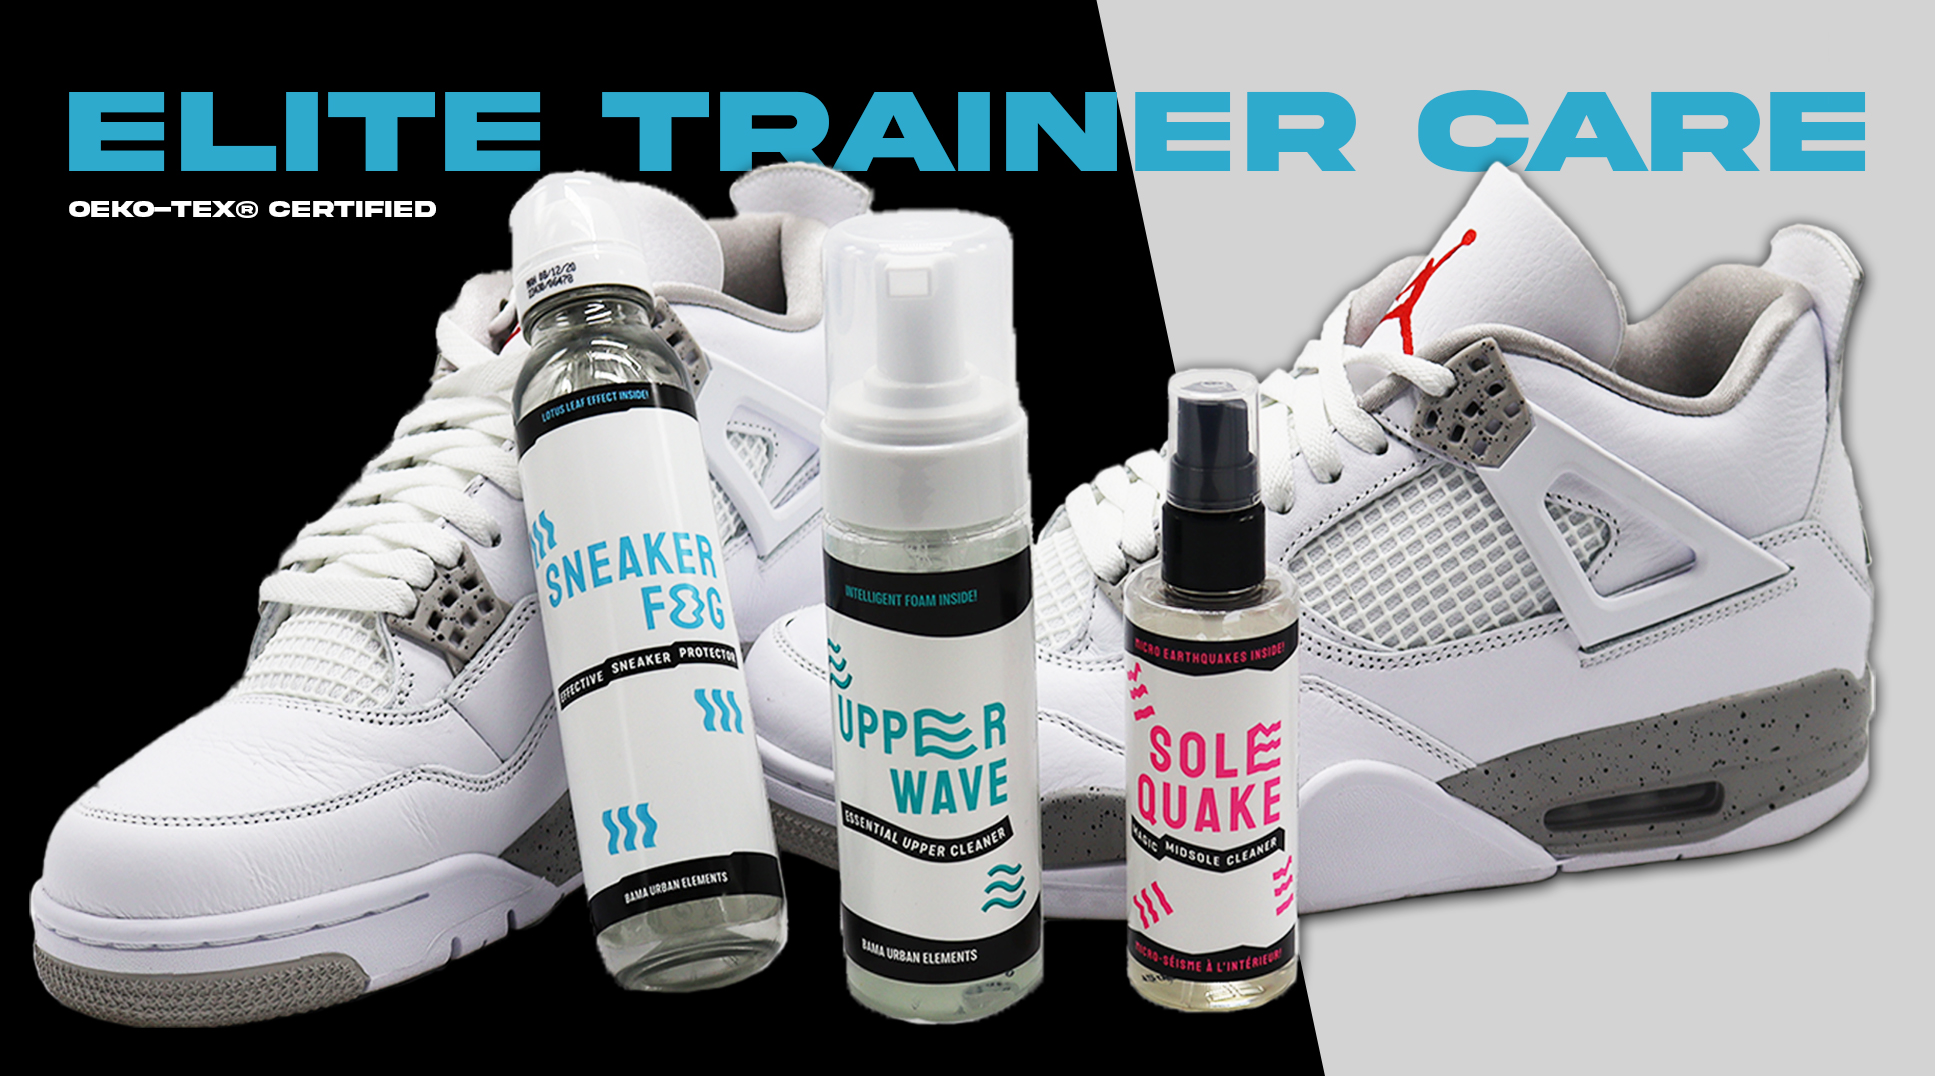 Elite Trainer Care with BAMA URBAN ELEMENTS products including SNEAKERFOG, UPPERWAVE and SOLEQUAKE